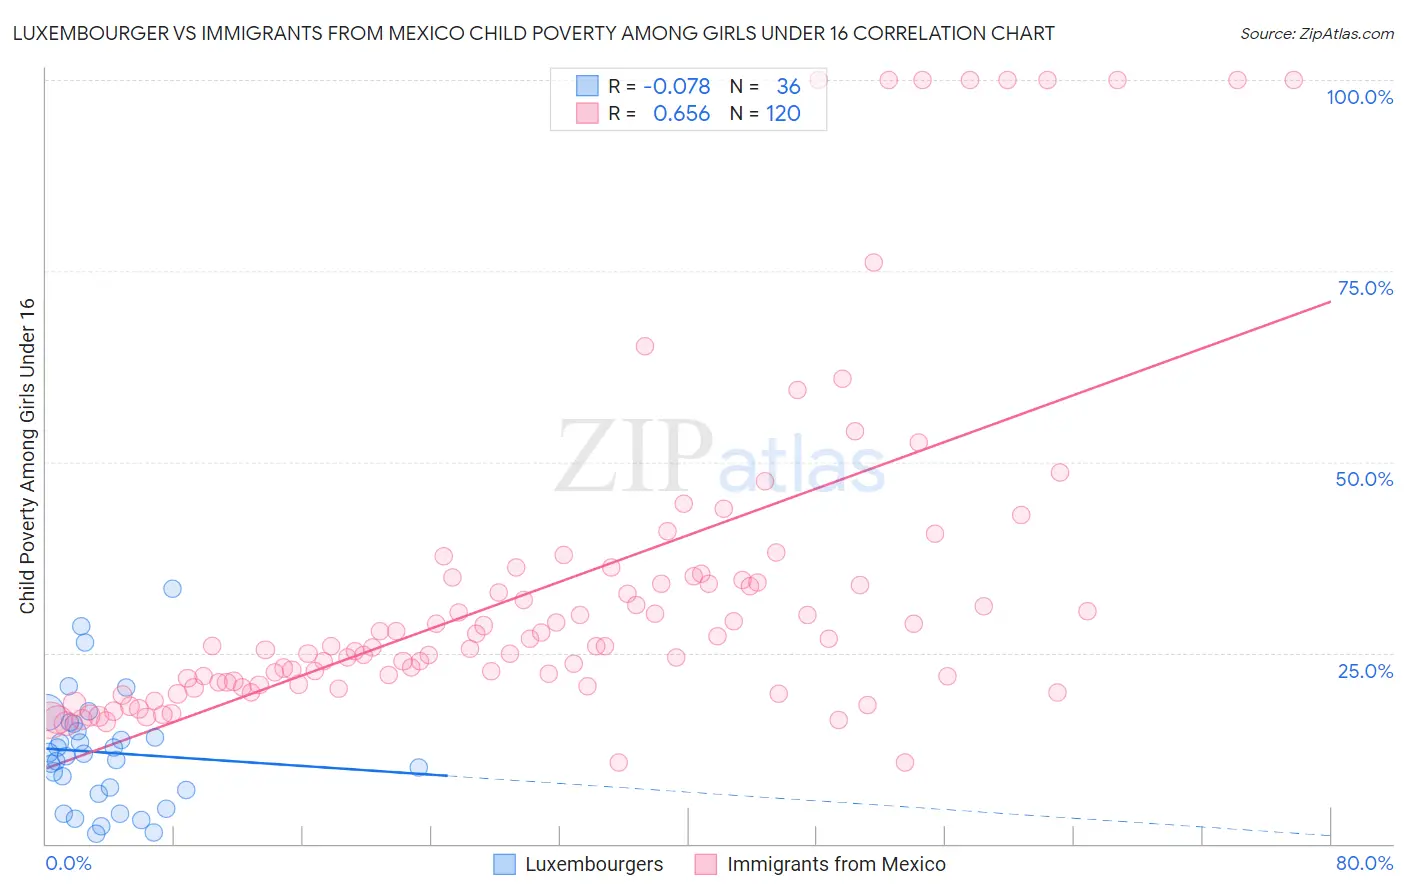 Luxembourger vs Immigrants from Mexico Child Poverty Among Girls Under 16